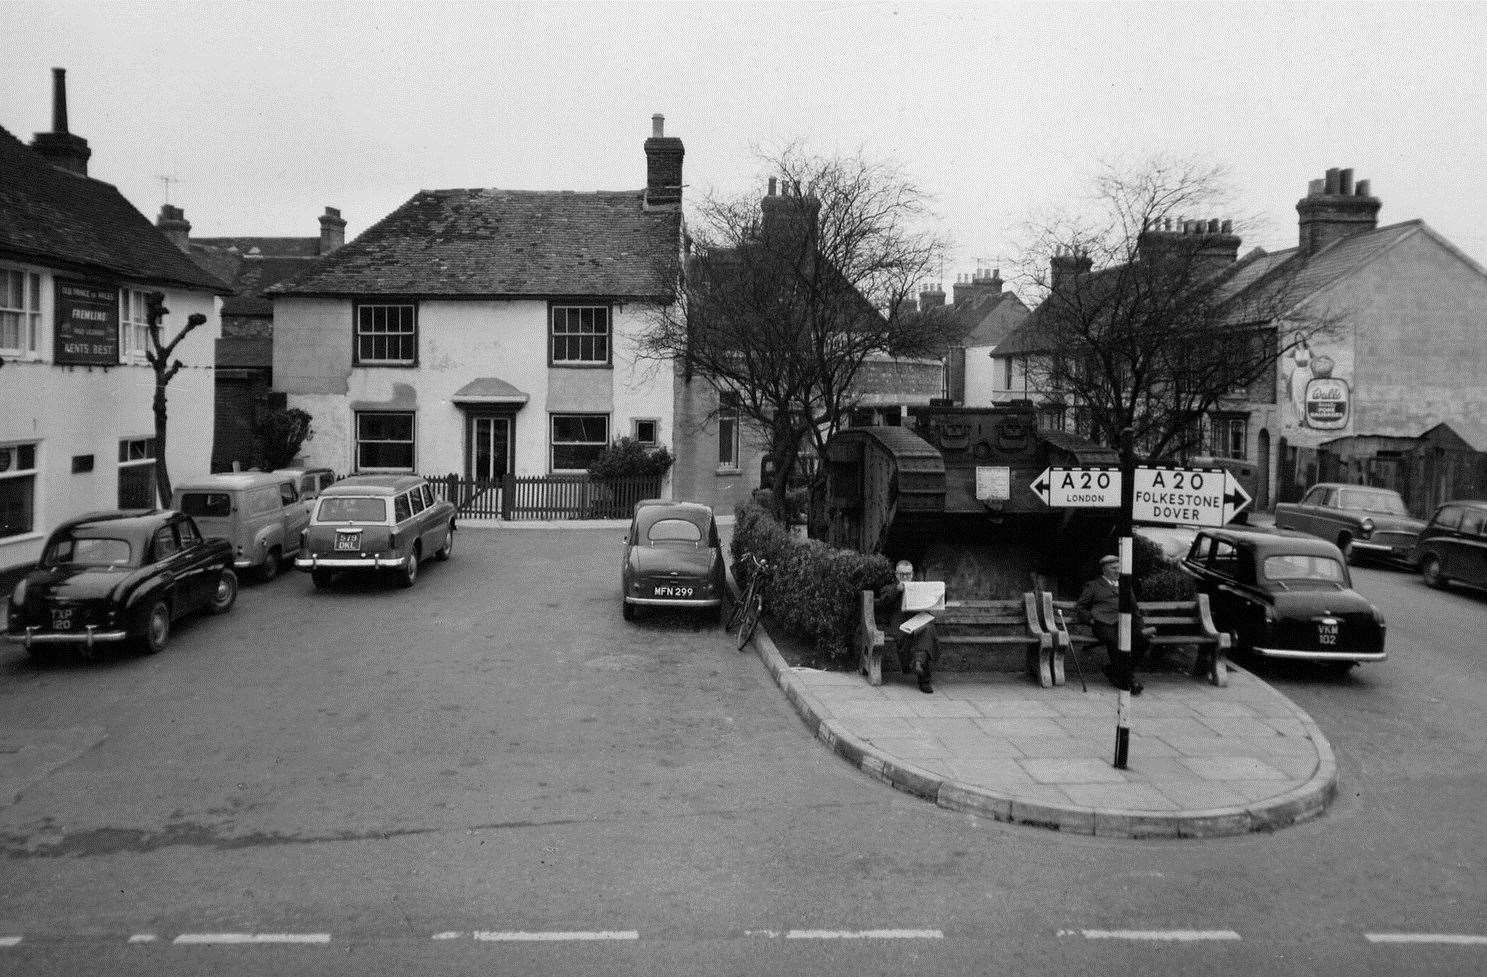 The pub - pictured in 1957 - next to the town’s tank